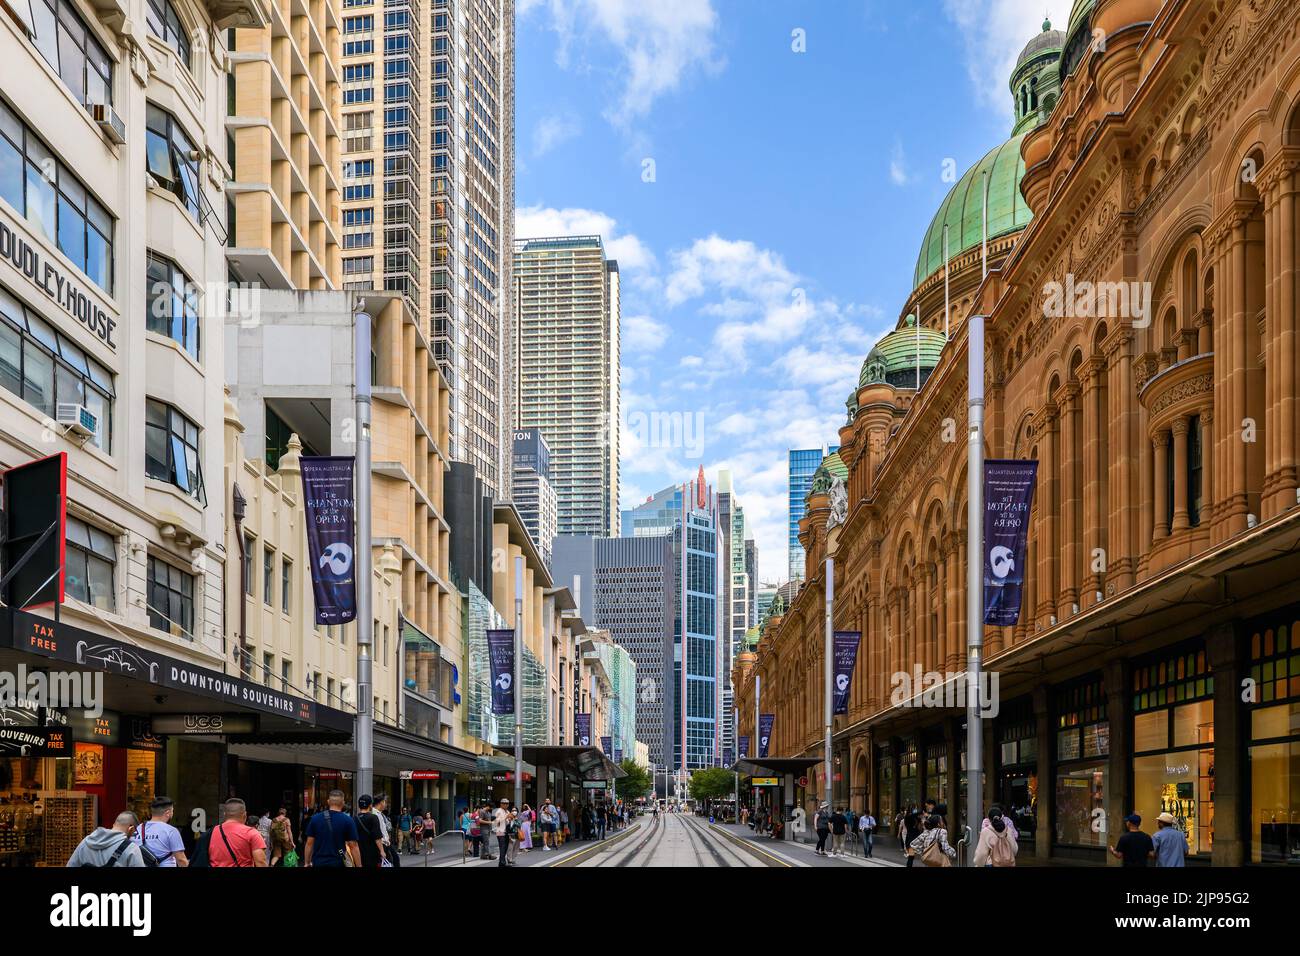 Sydney, Australia - April 16, 2022: George street viewed towards South with the Sydney Queen Victoria Building on the right and modern skyscrapers can Stock Photo